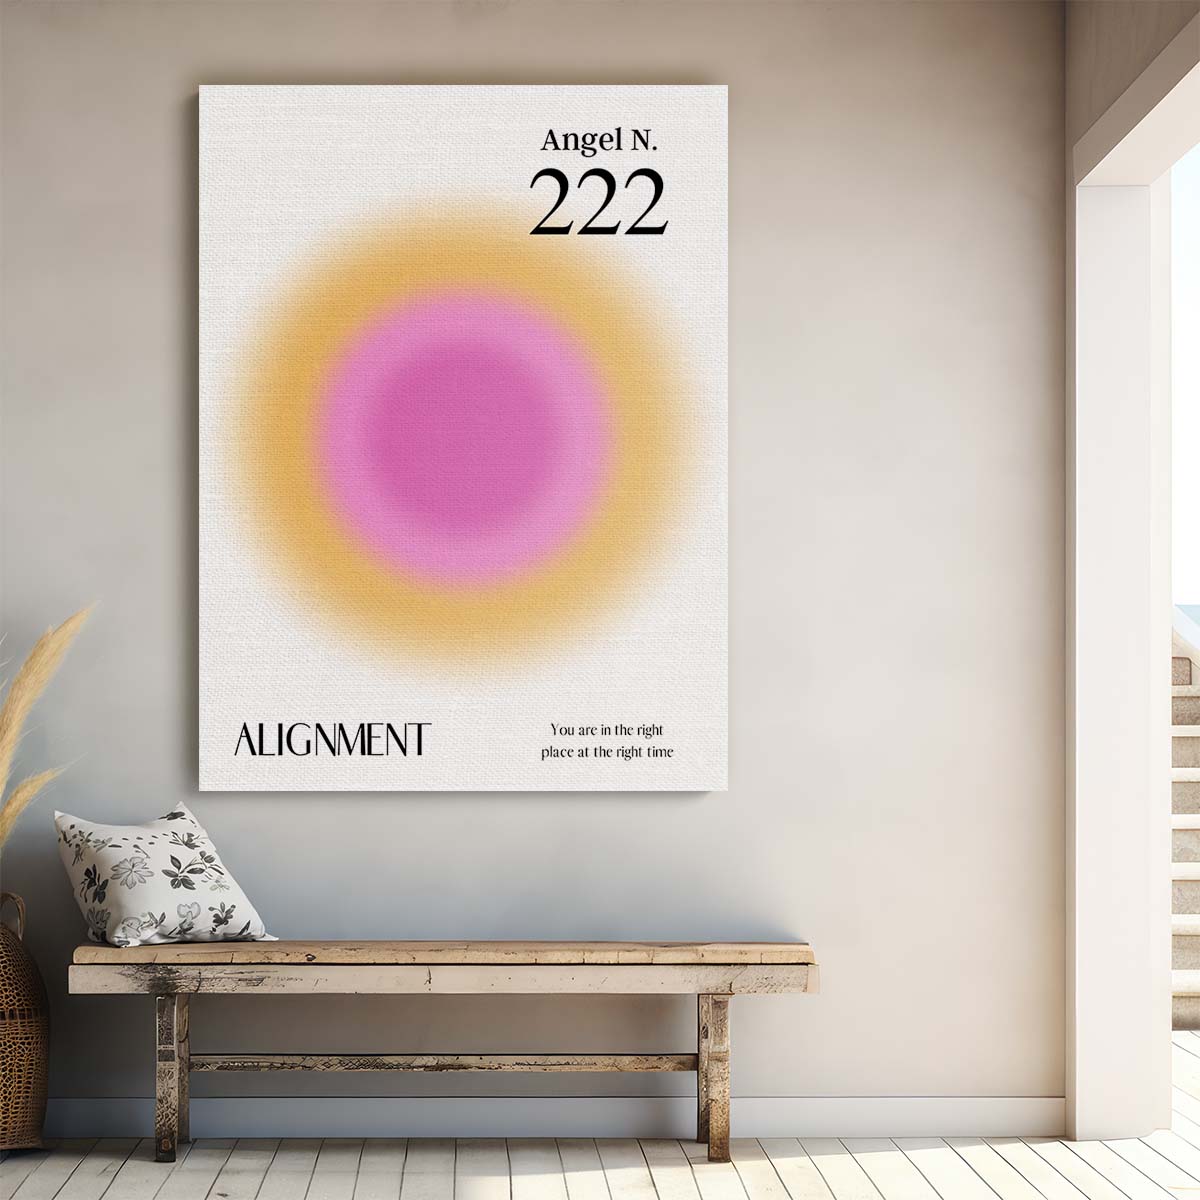 Colorful Angel Number 222 Illustration Positive Energy Manifestation Poster by Luxuriance Designs, made in USA